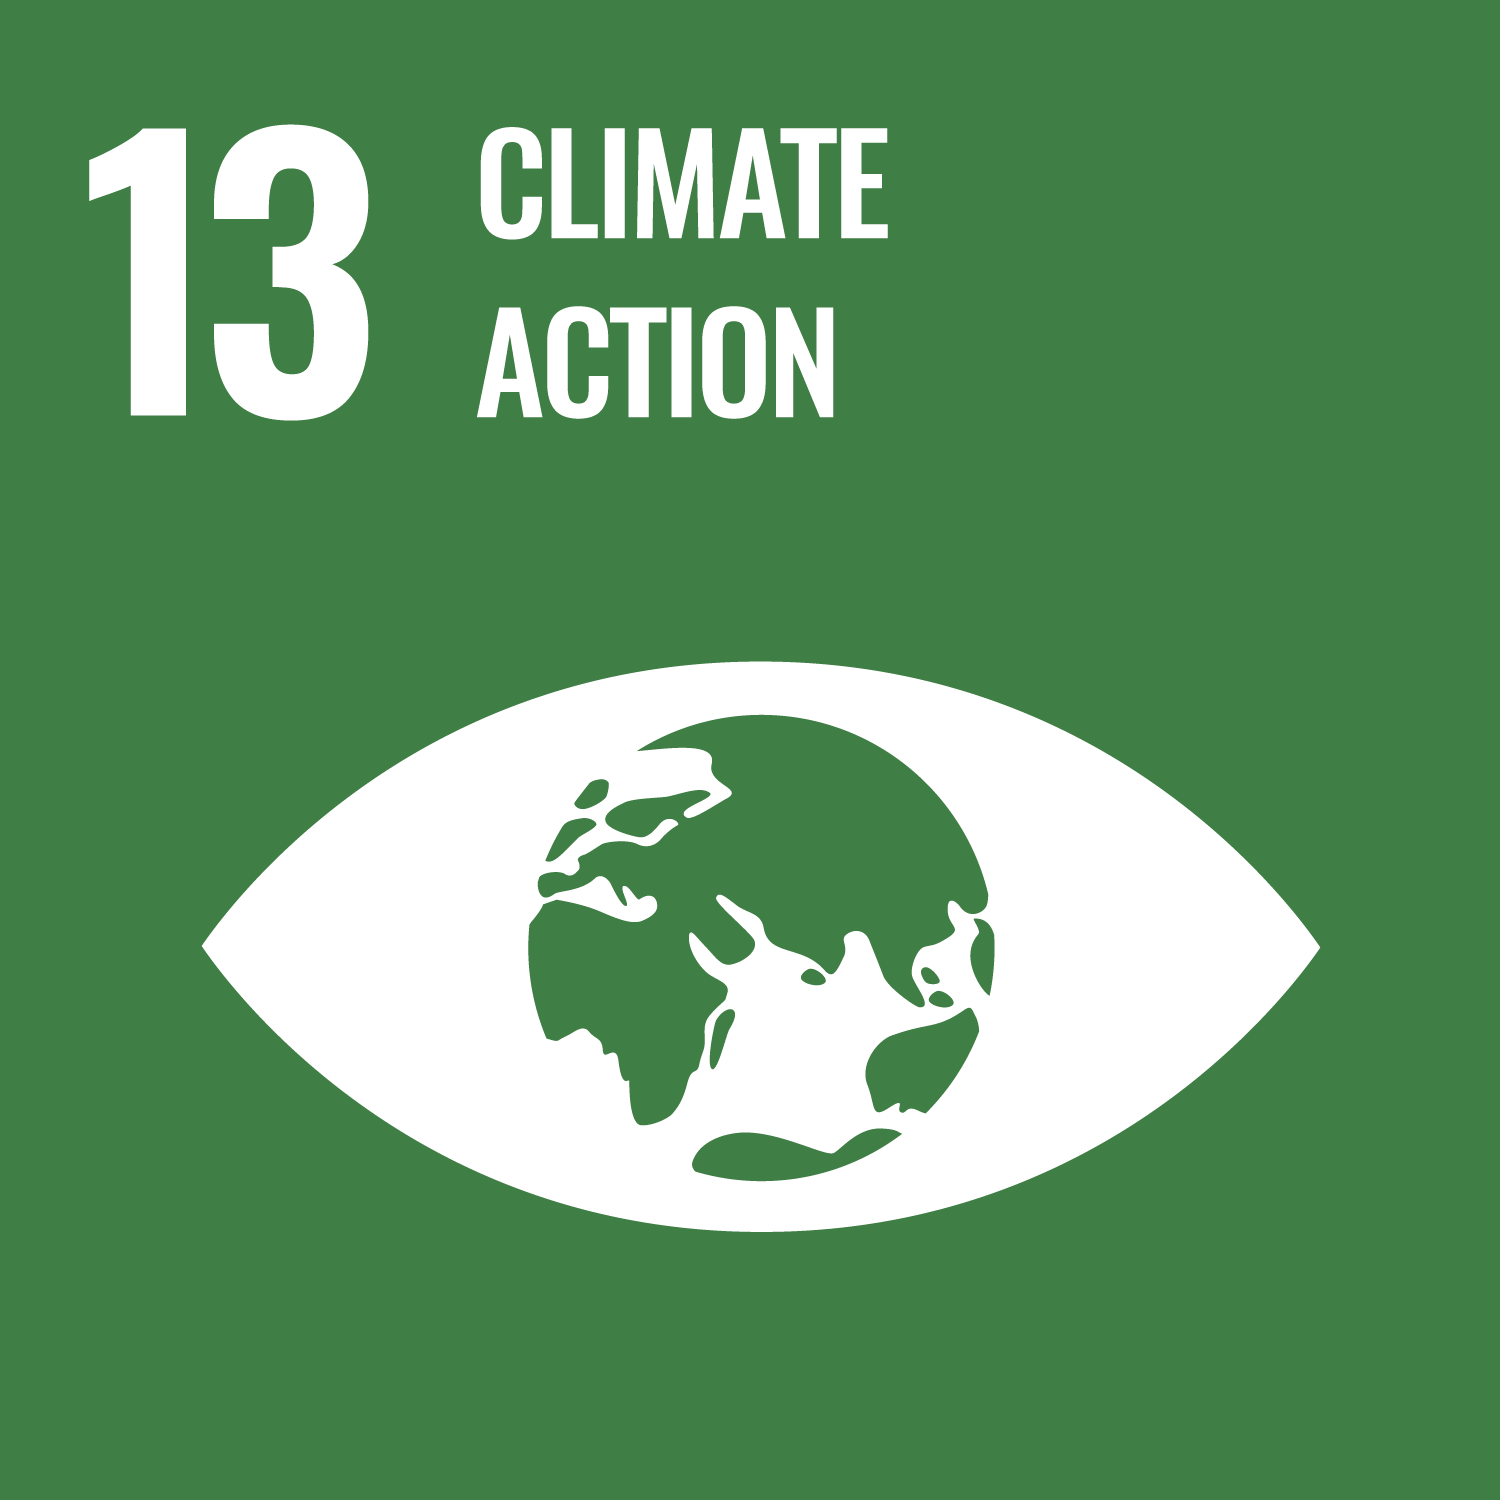 United Nation's 17 Sustainable Development Goals goal number 13